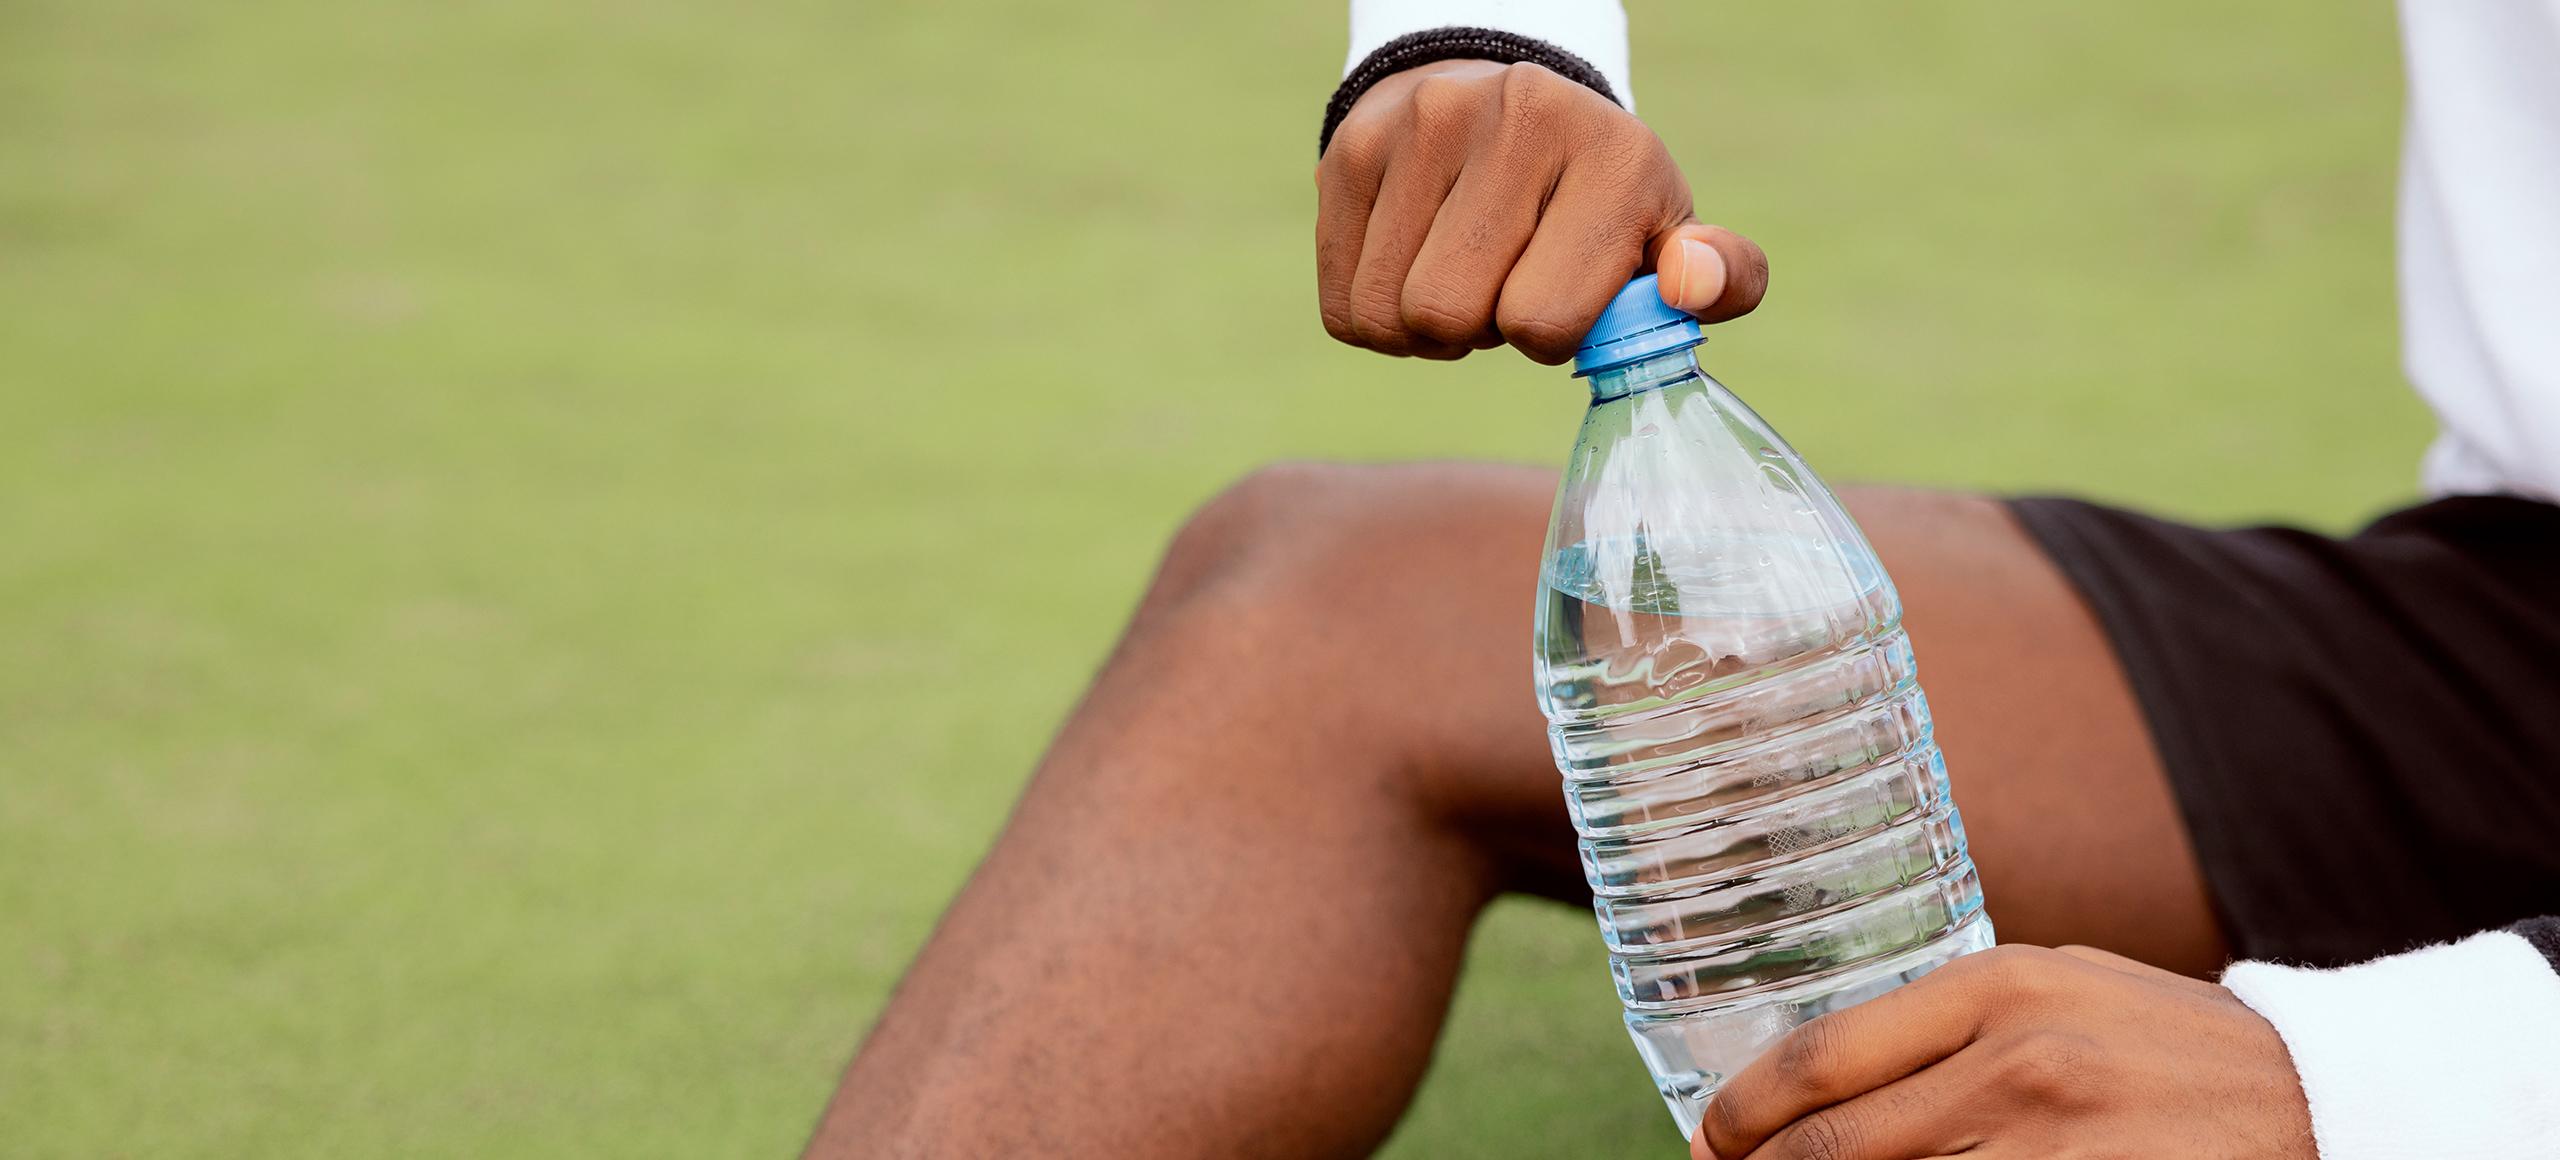 Tennis player with single-use plastic water bottle